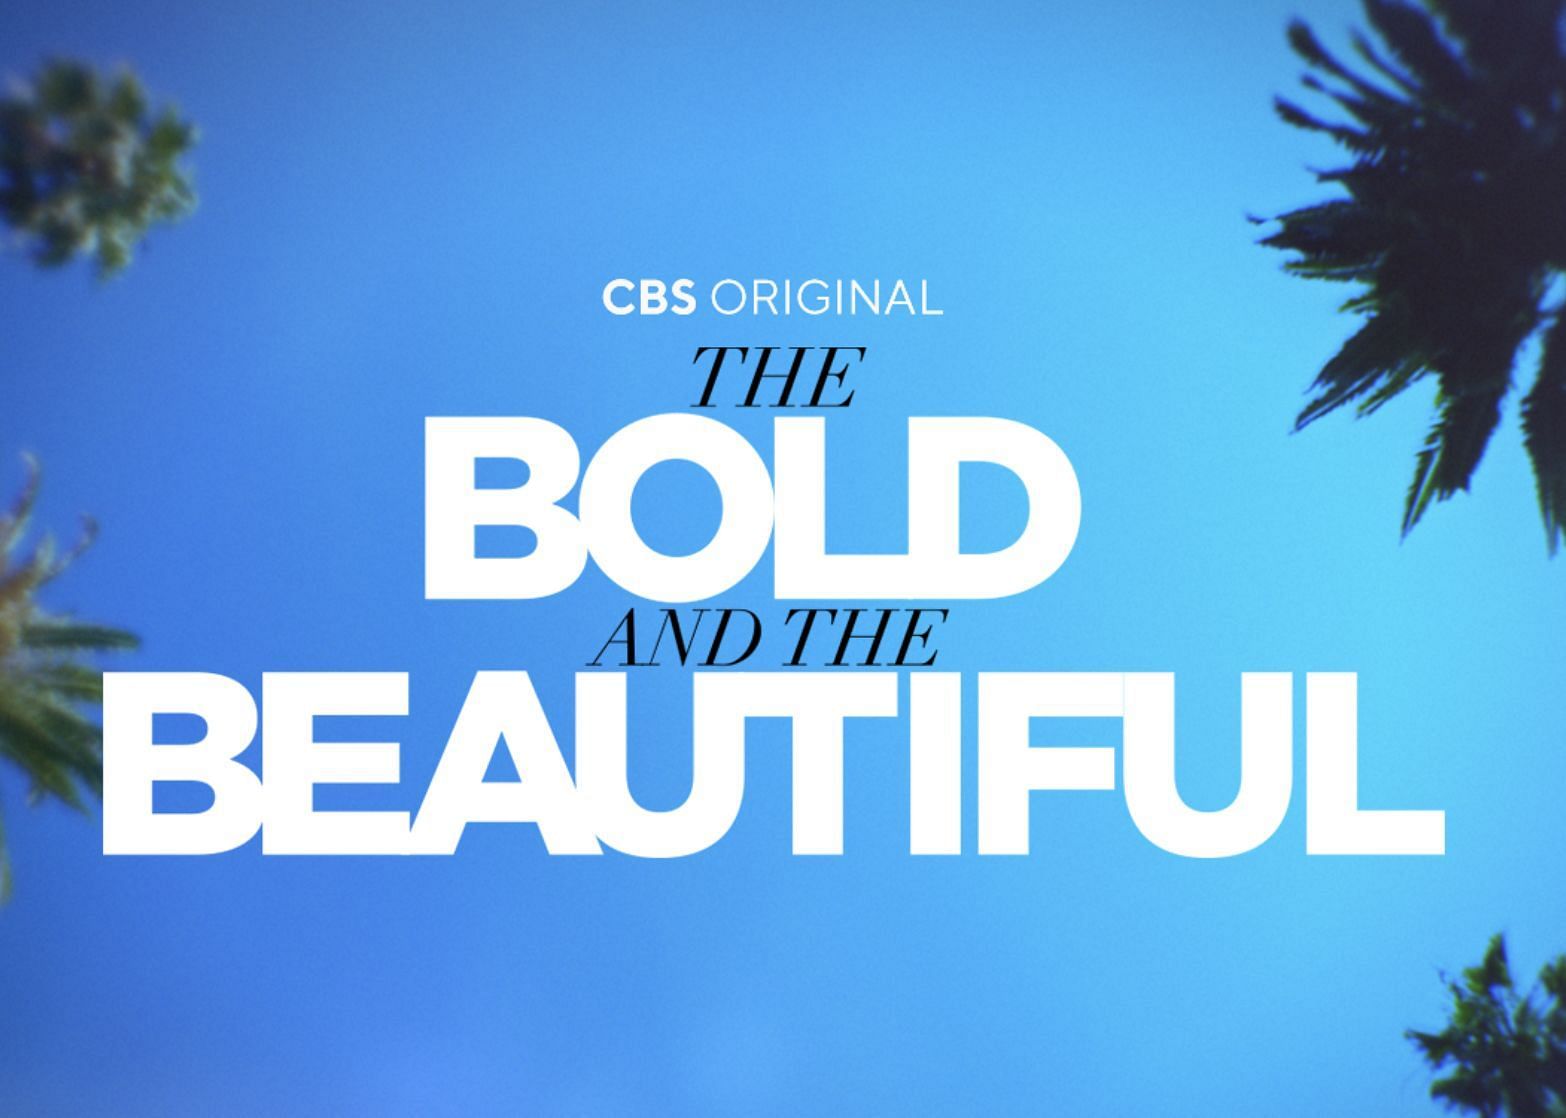 The spoilers of the upcoming week for The Bold and the Beautiful (Image via CBS)